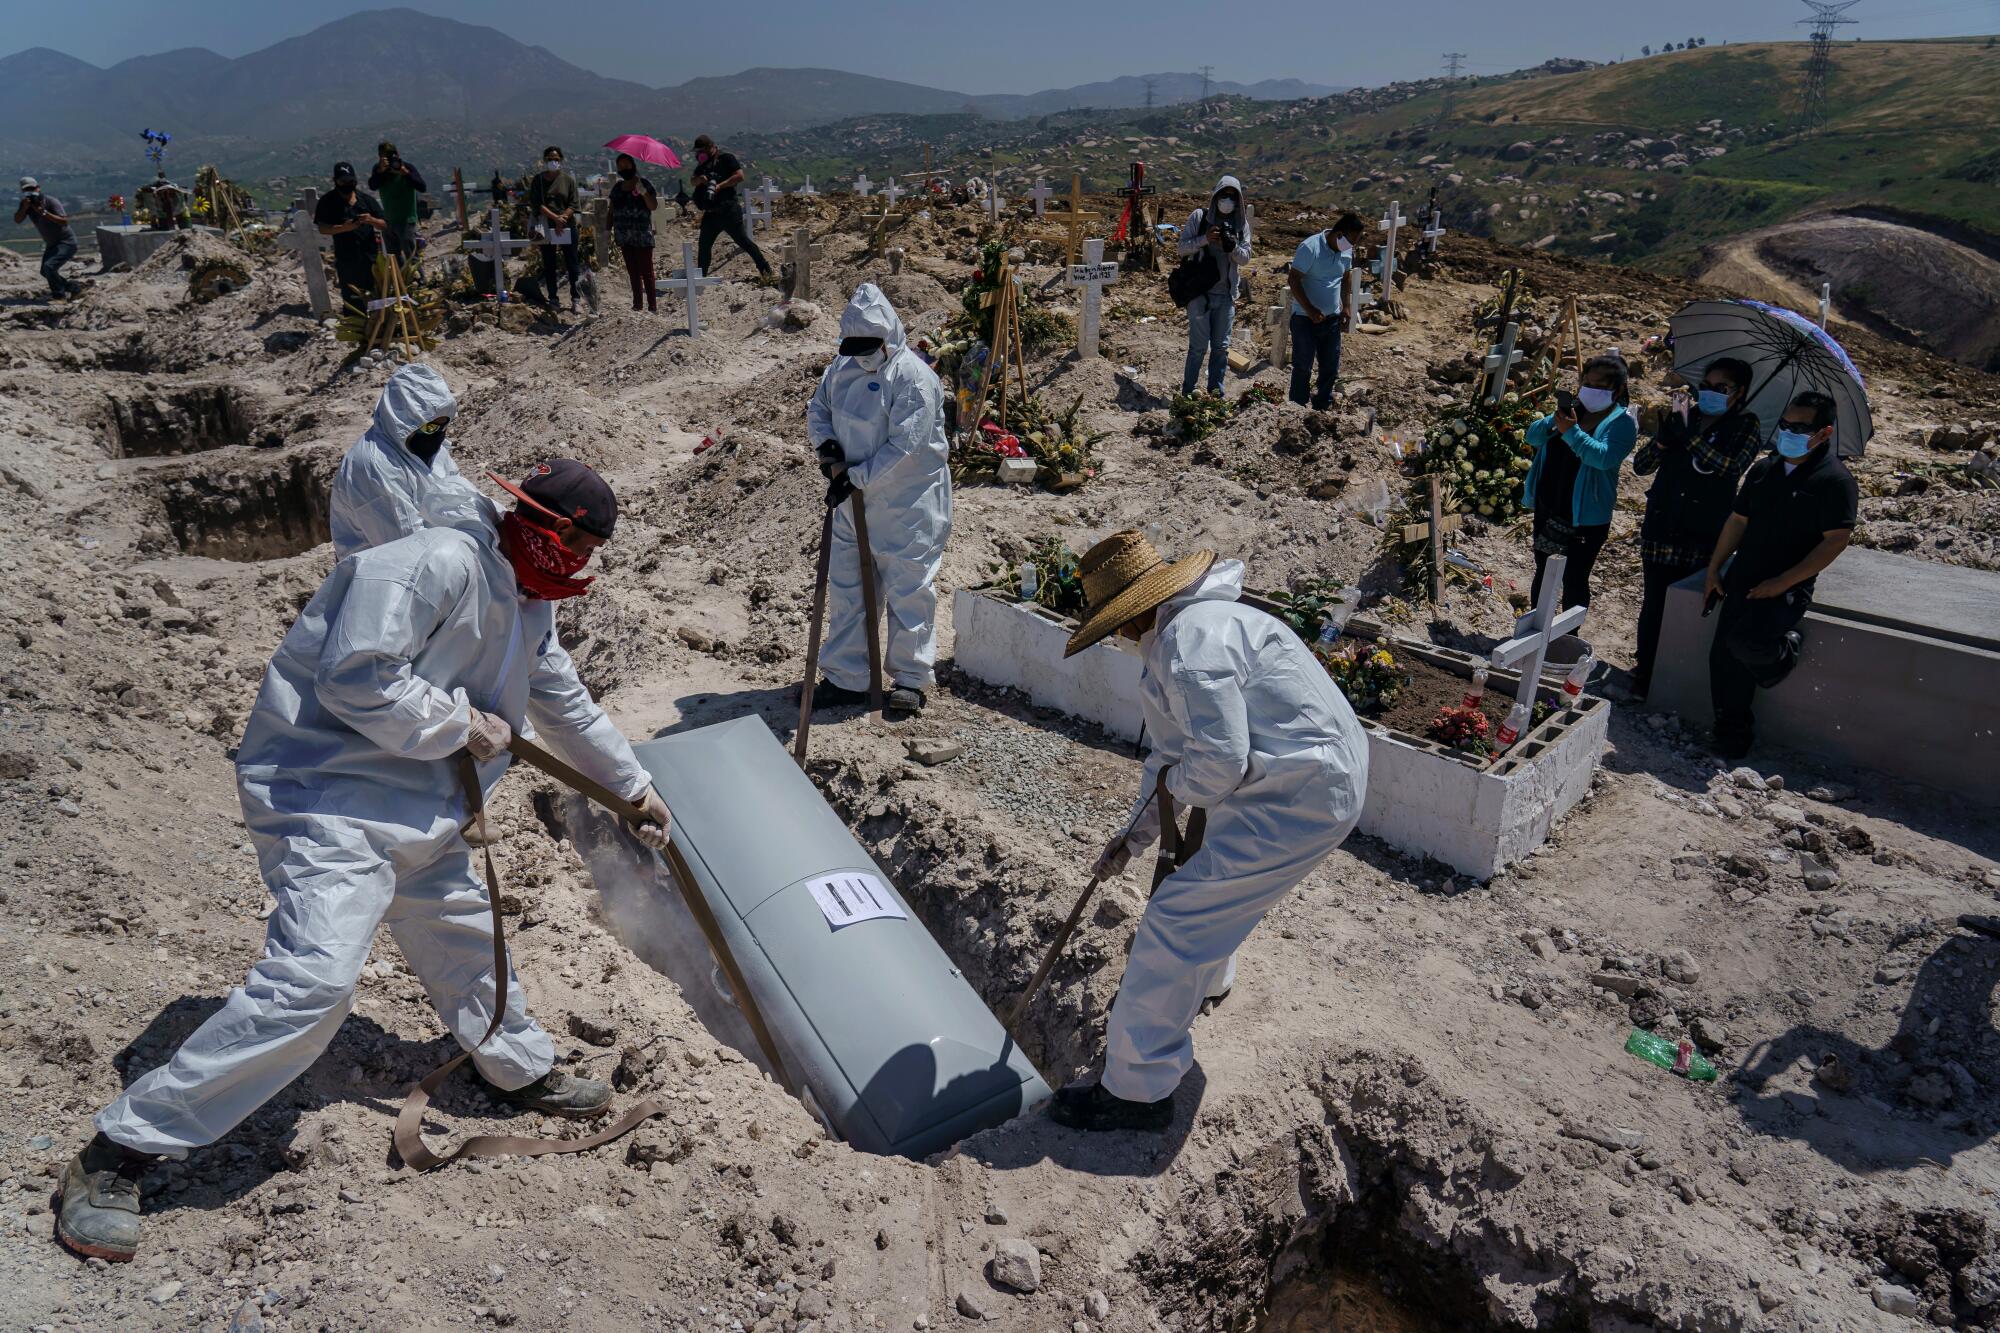 Cemetery workers lower the casket of Juan Velasco, who died of COVID-19 symptoms, as his family watches the burial.